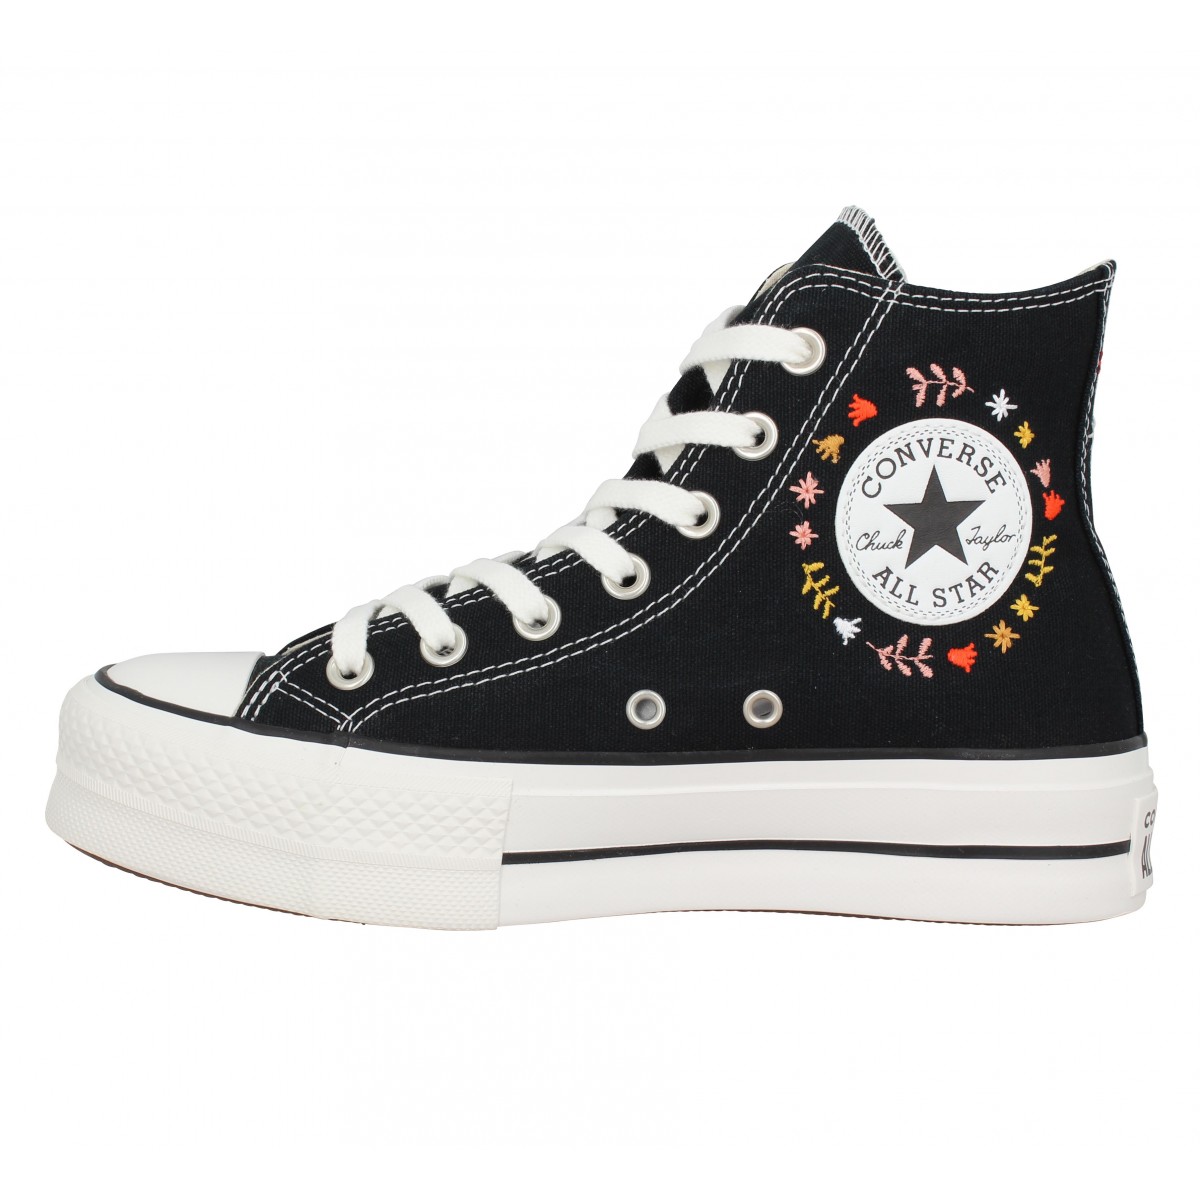 CONVERSE CT All Star Lift Hi It's Okay To Wander toile Femme Noir